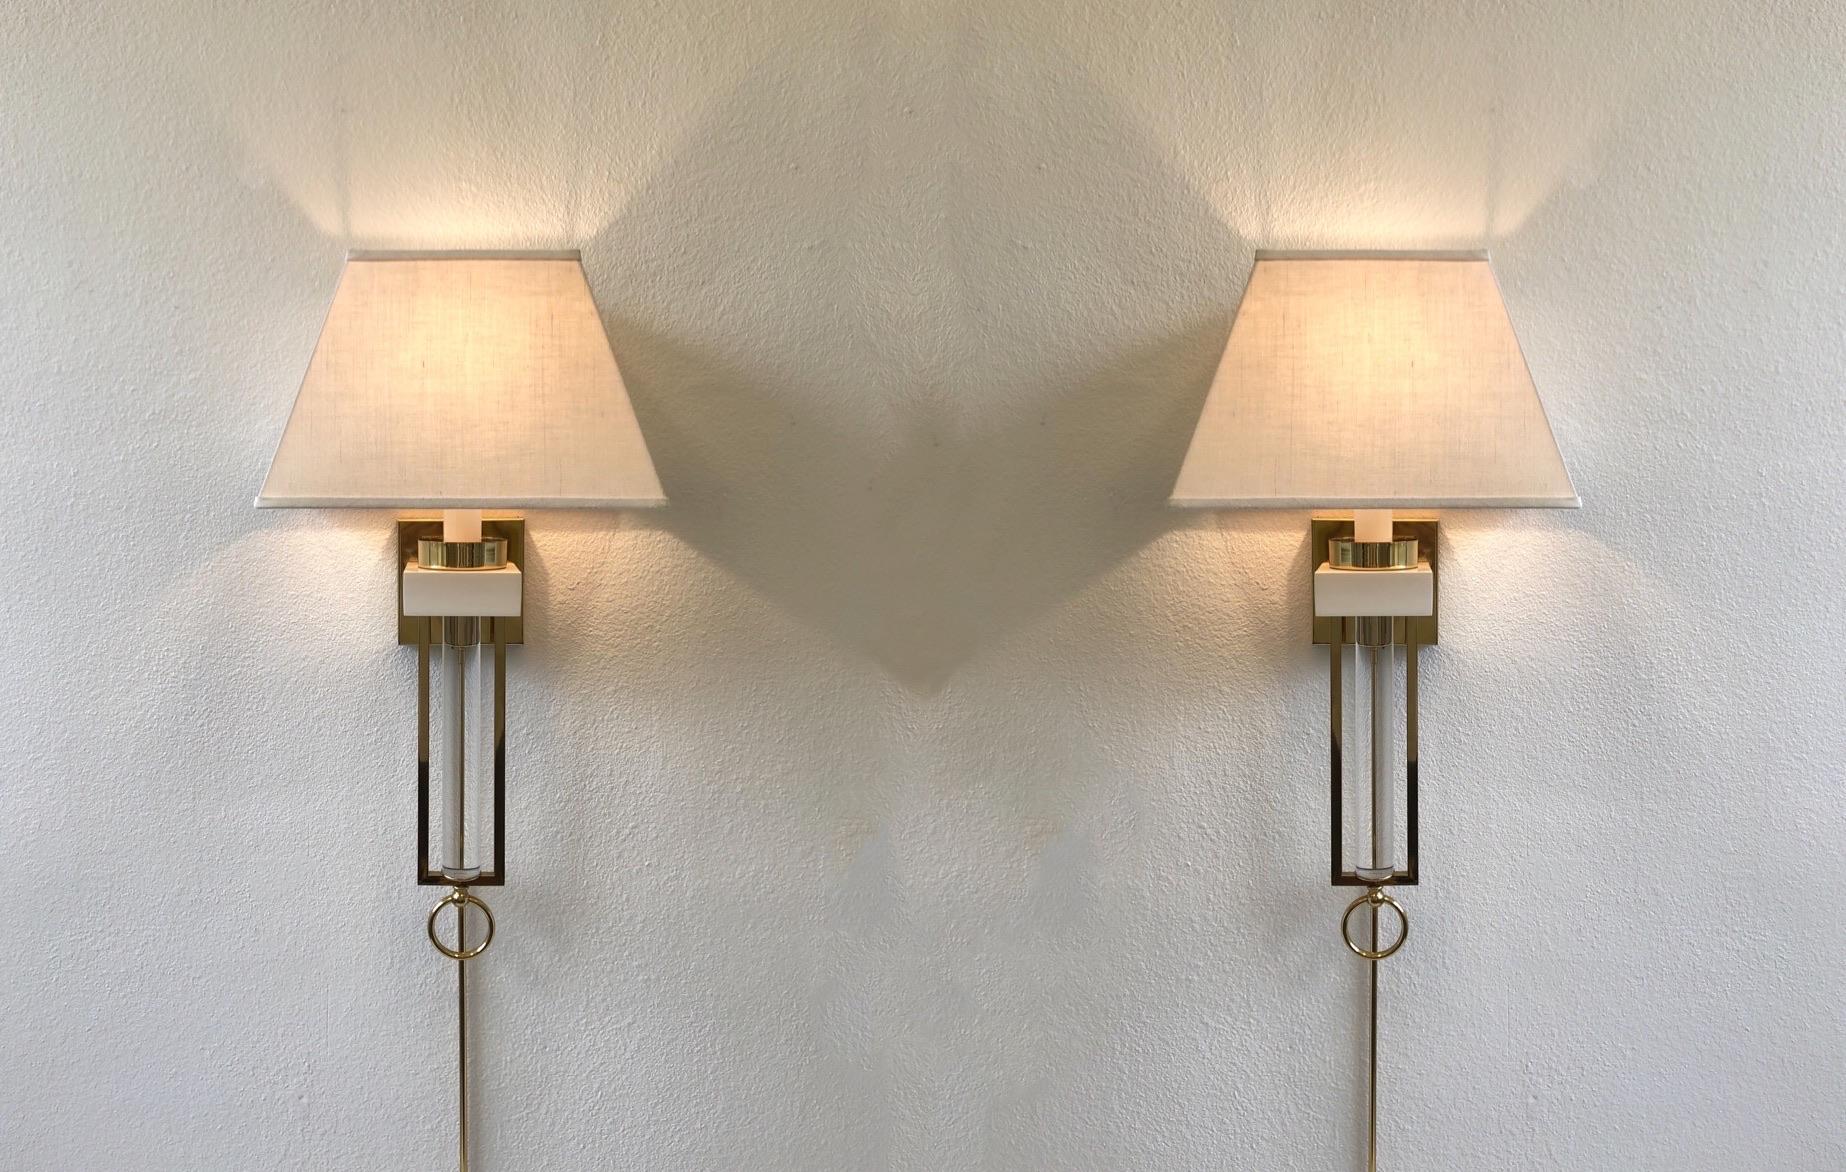 Glamorous 1970s pair of ‘Regency’ wall sconces.
The sconces are constructed of polish brass, clear Lucite, white lacquered wood with vanilla linen shades.
This are in original condition and can be wired directly or with a plug.
Measurements: